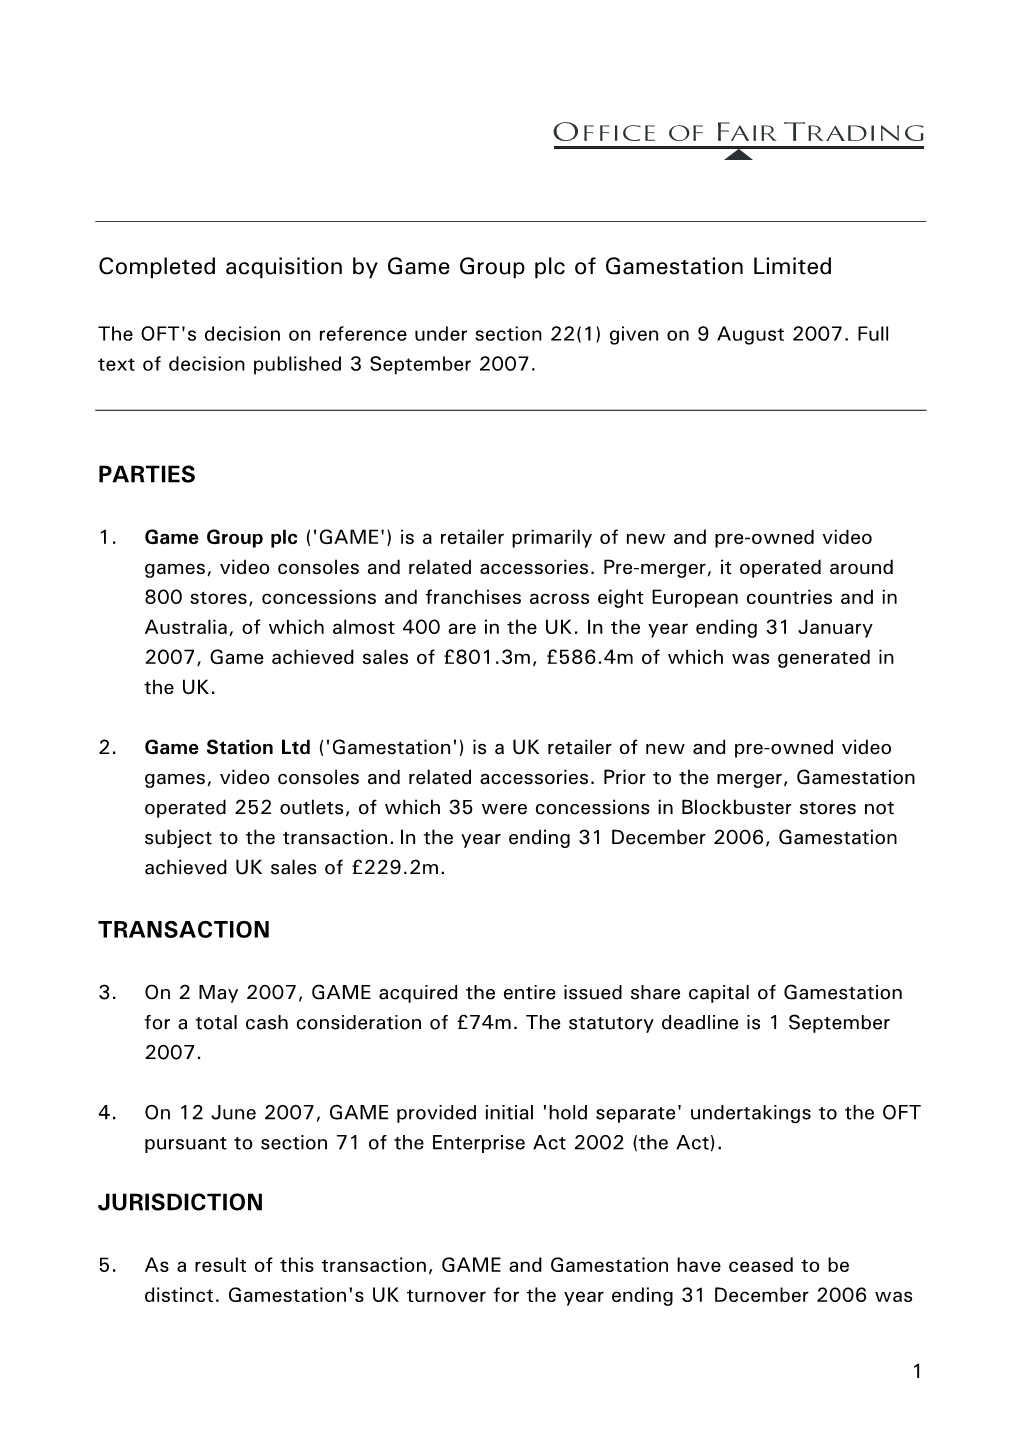 Completed Acquisition by Game Group Plc of Gamestation Limited